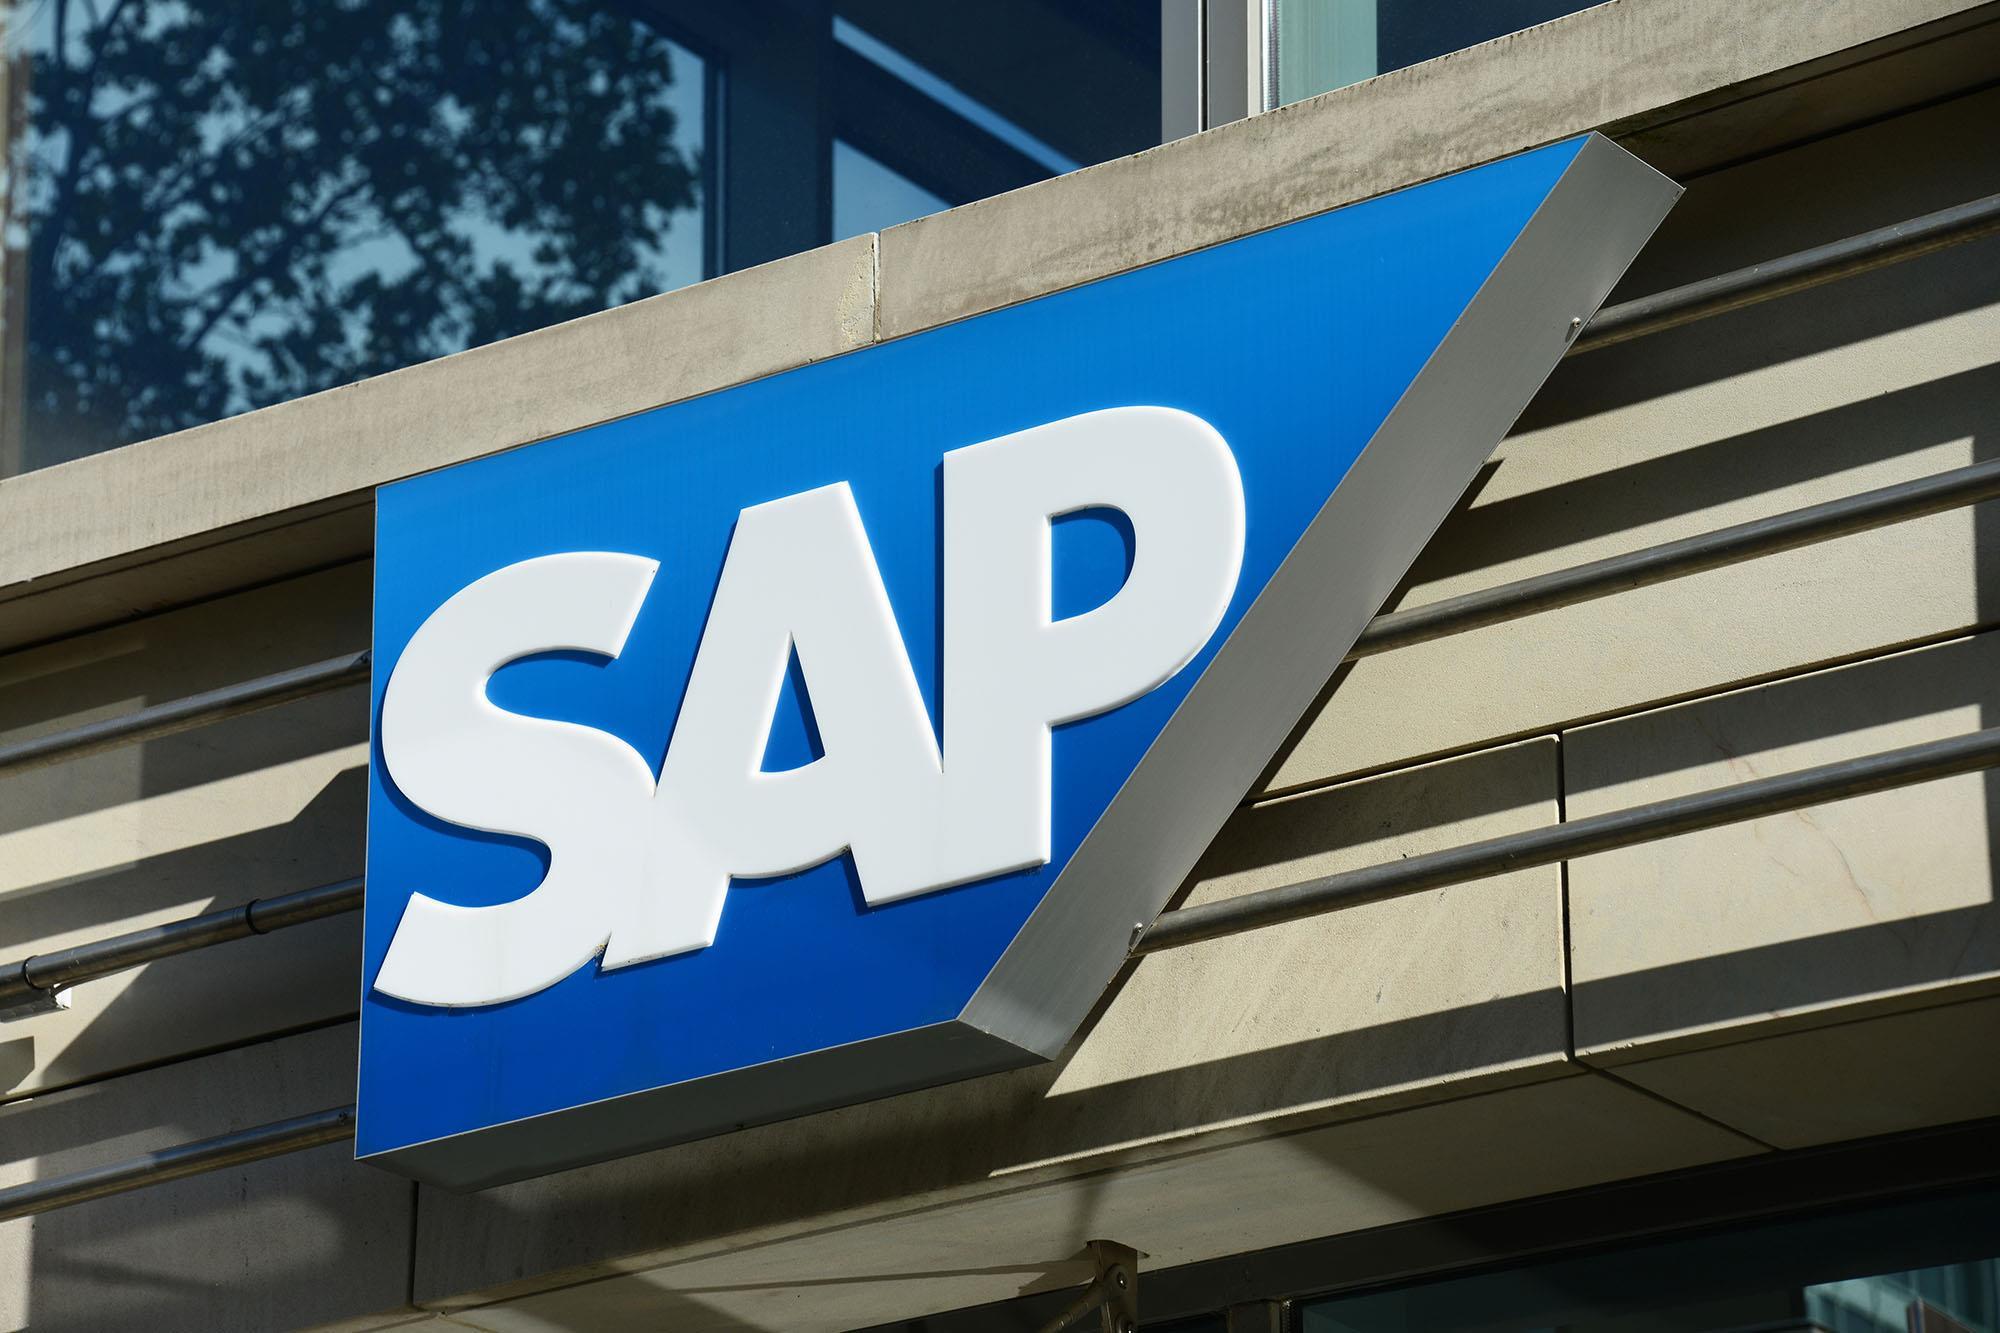 sap-facts-business-bydesign-apnube